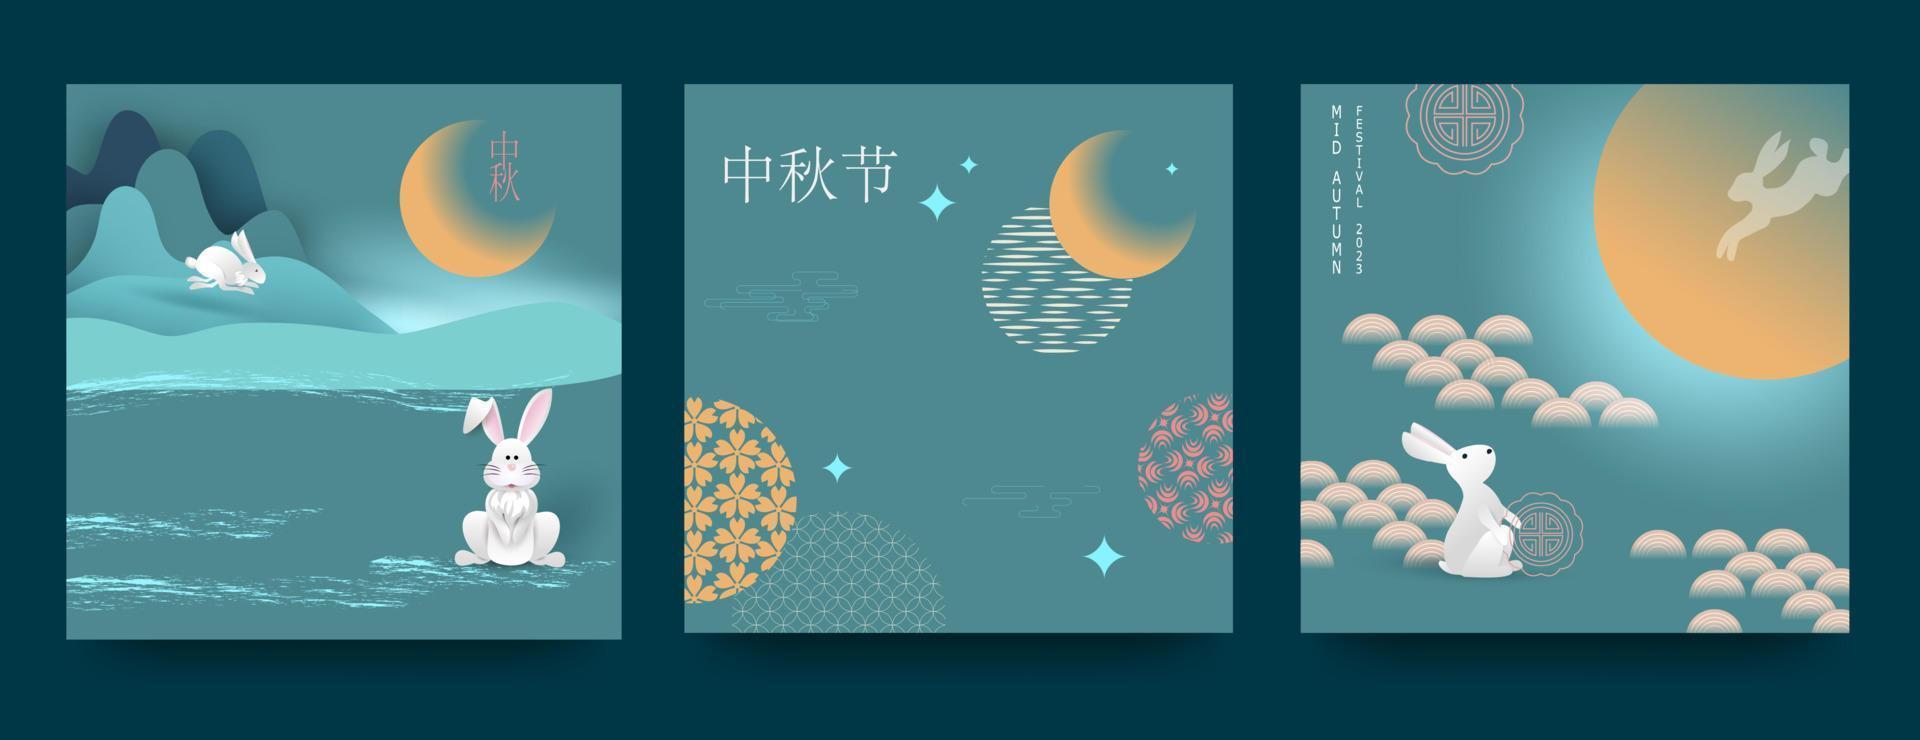 Set of backgrounds, greeting cards, posters, holiday covers with moon, moon cake and cute bunnies. Chinese translation - Mid-Autumn Festival. vector